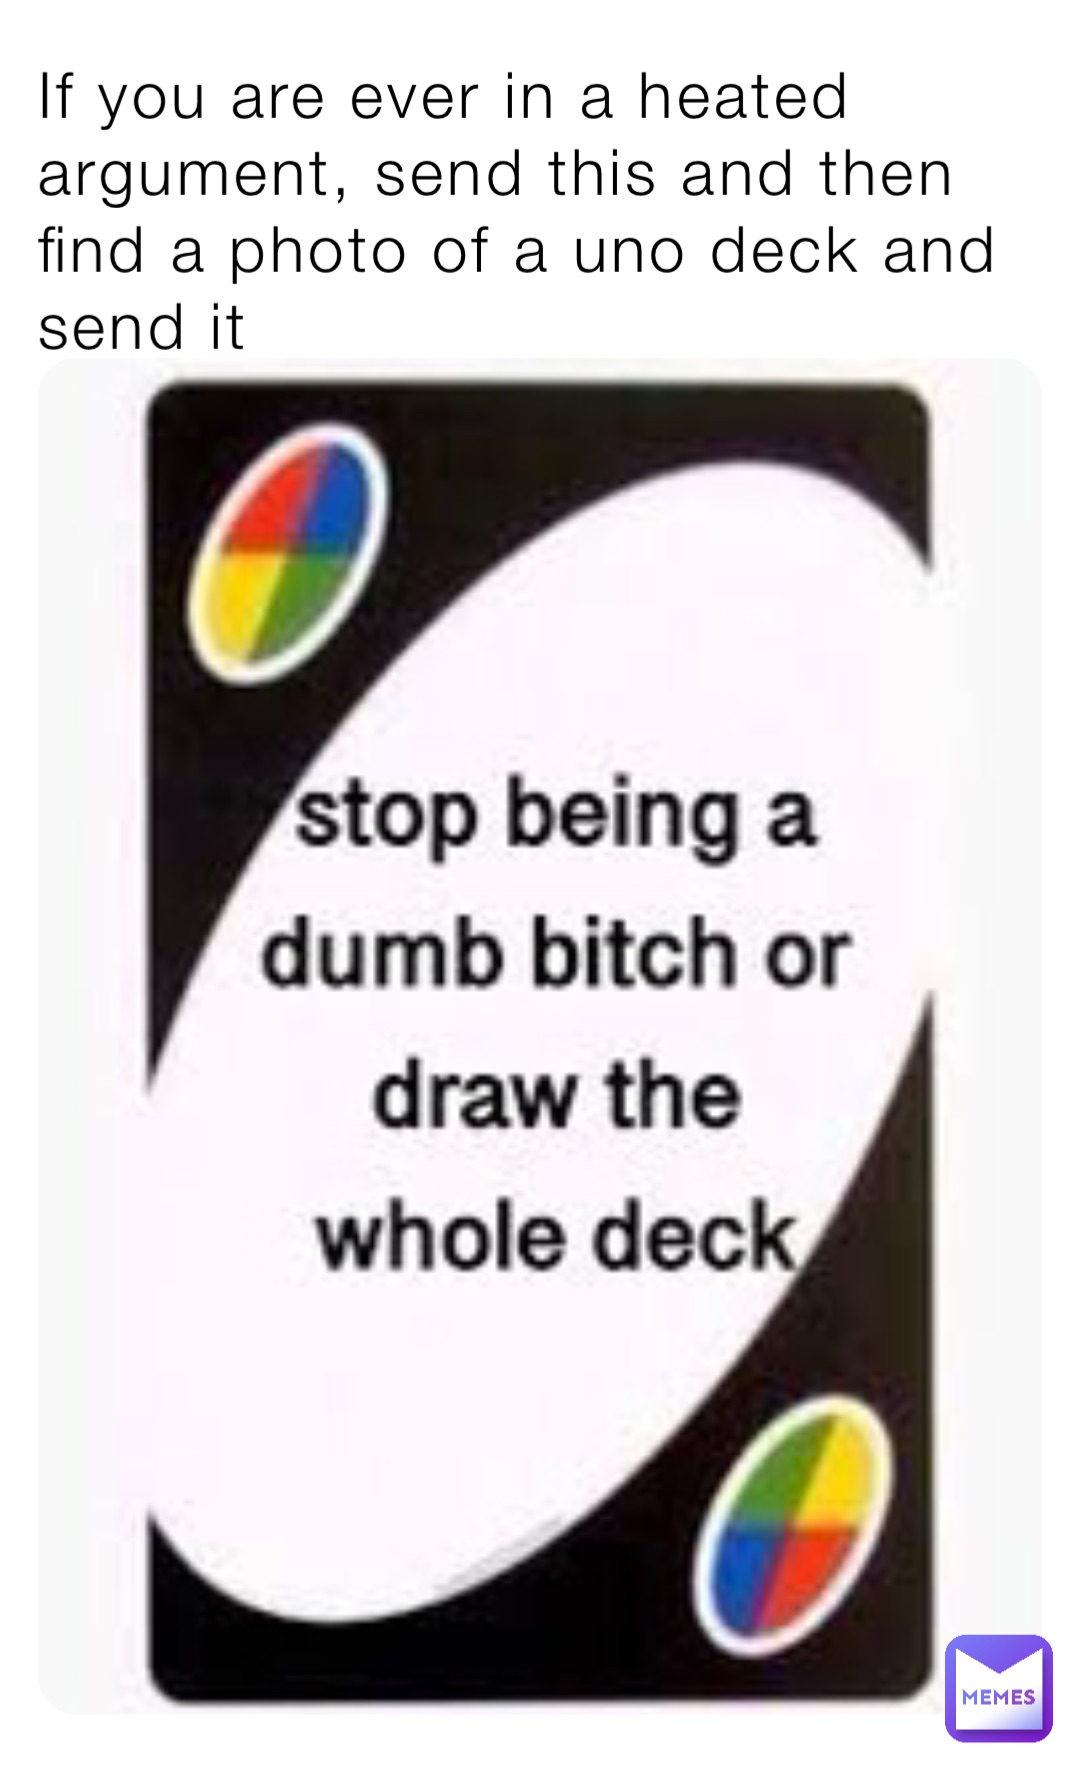 If you are ever in a heated argument, send this and then find a photo of a uno deck and send it